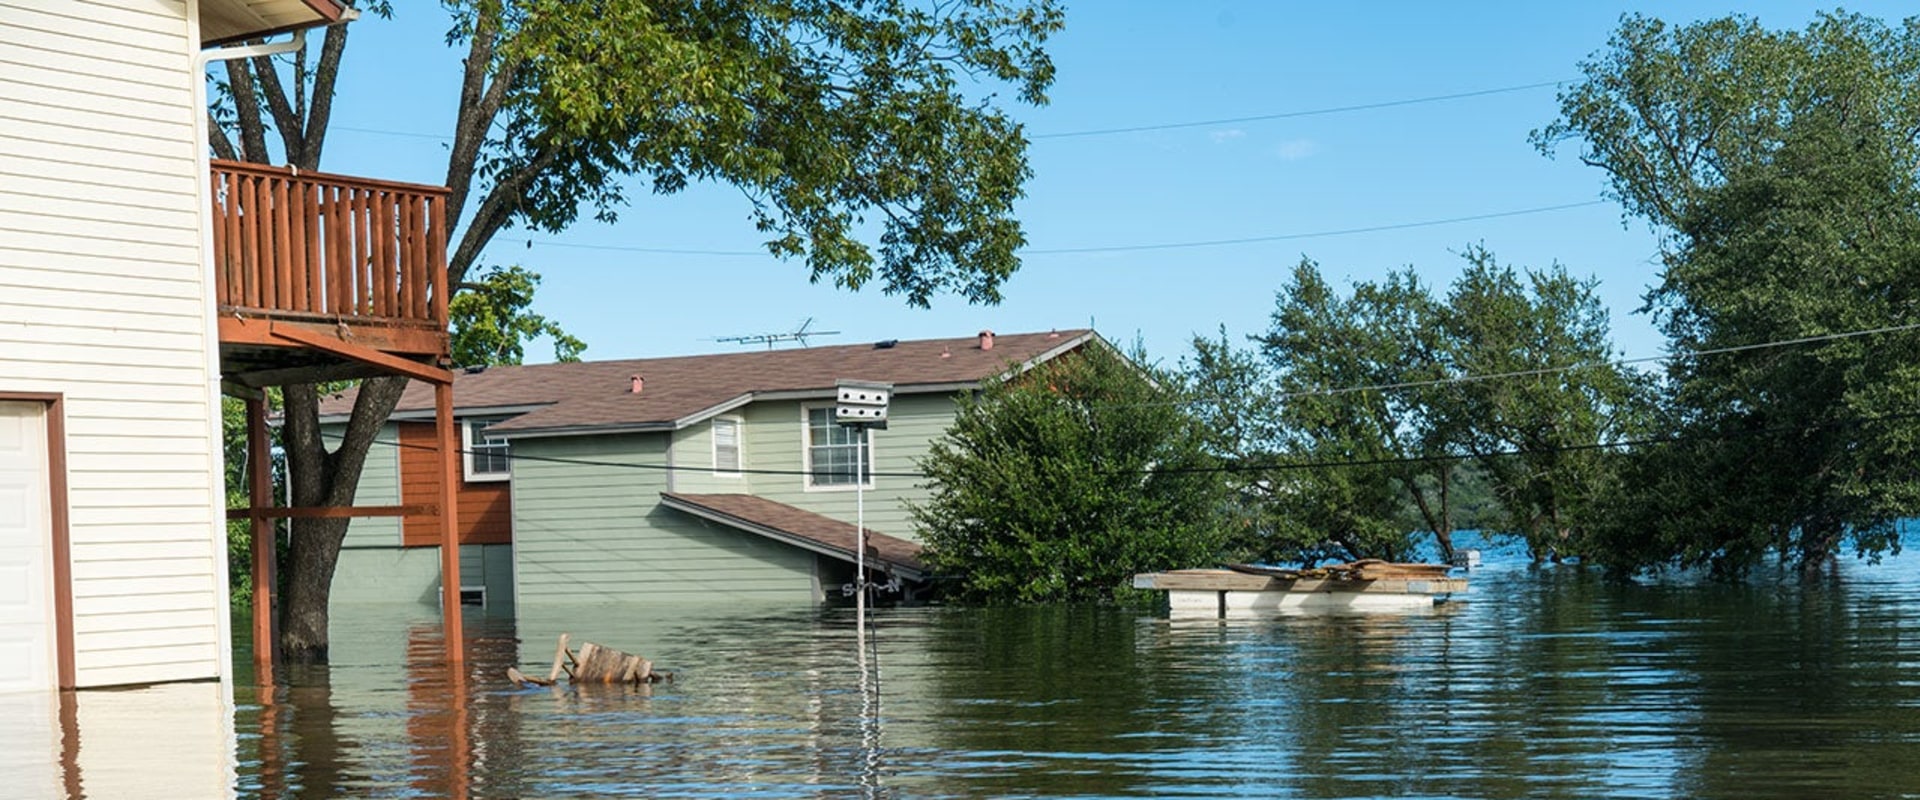 Flood Policies For Home Insurance